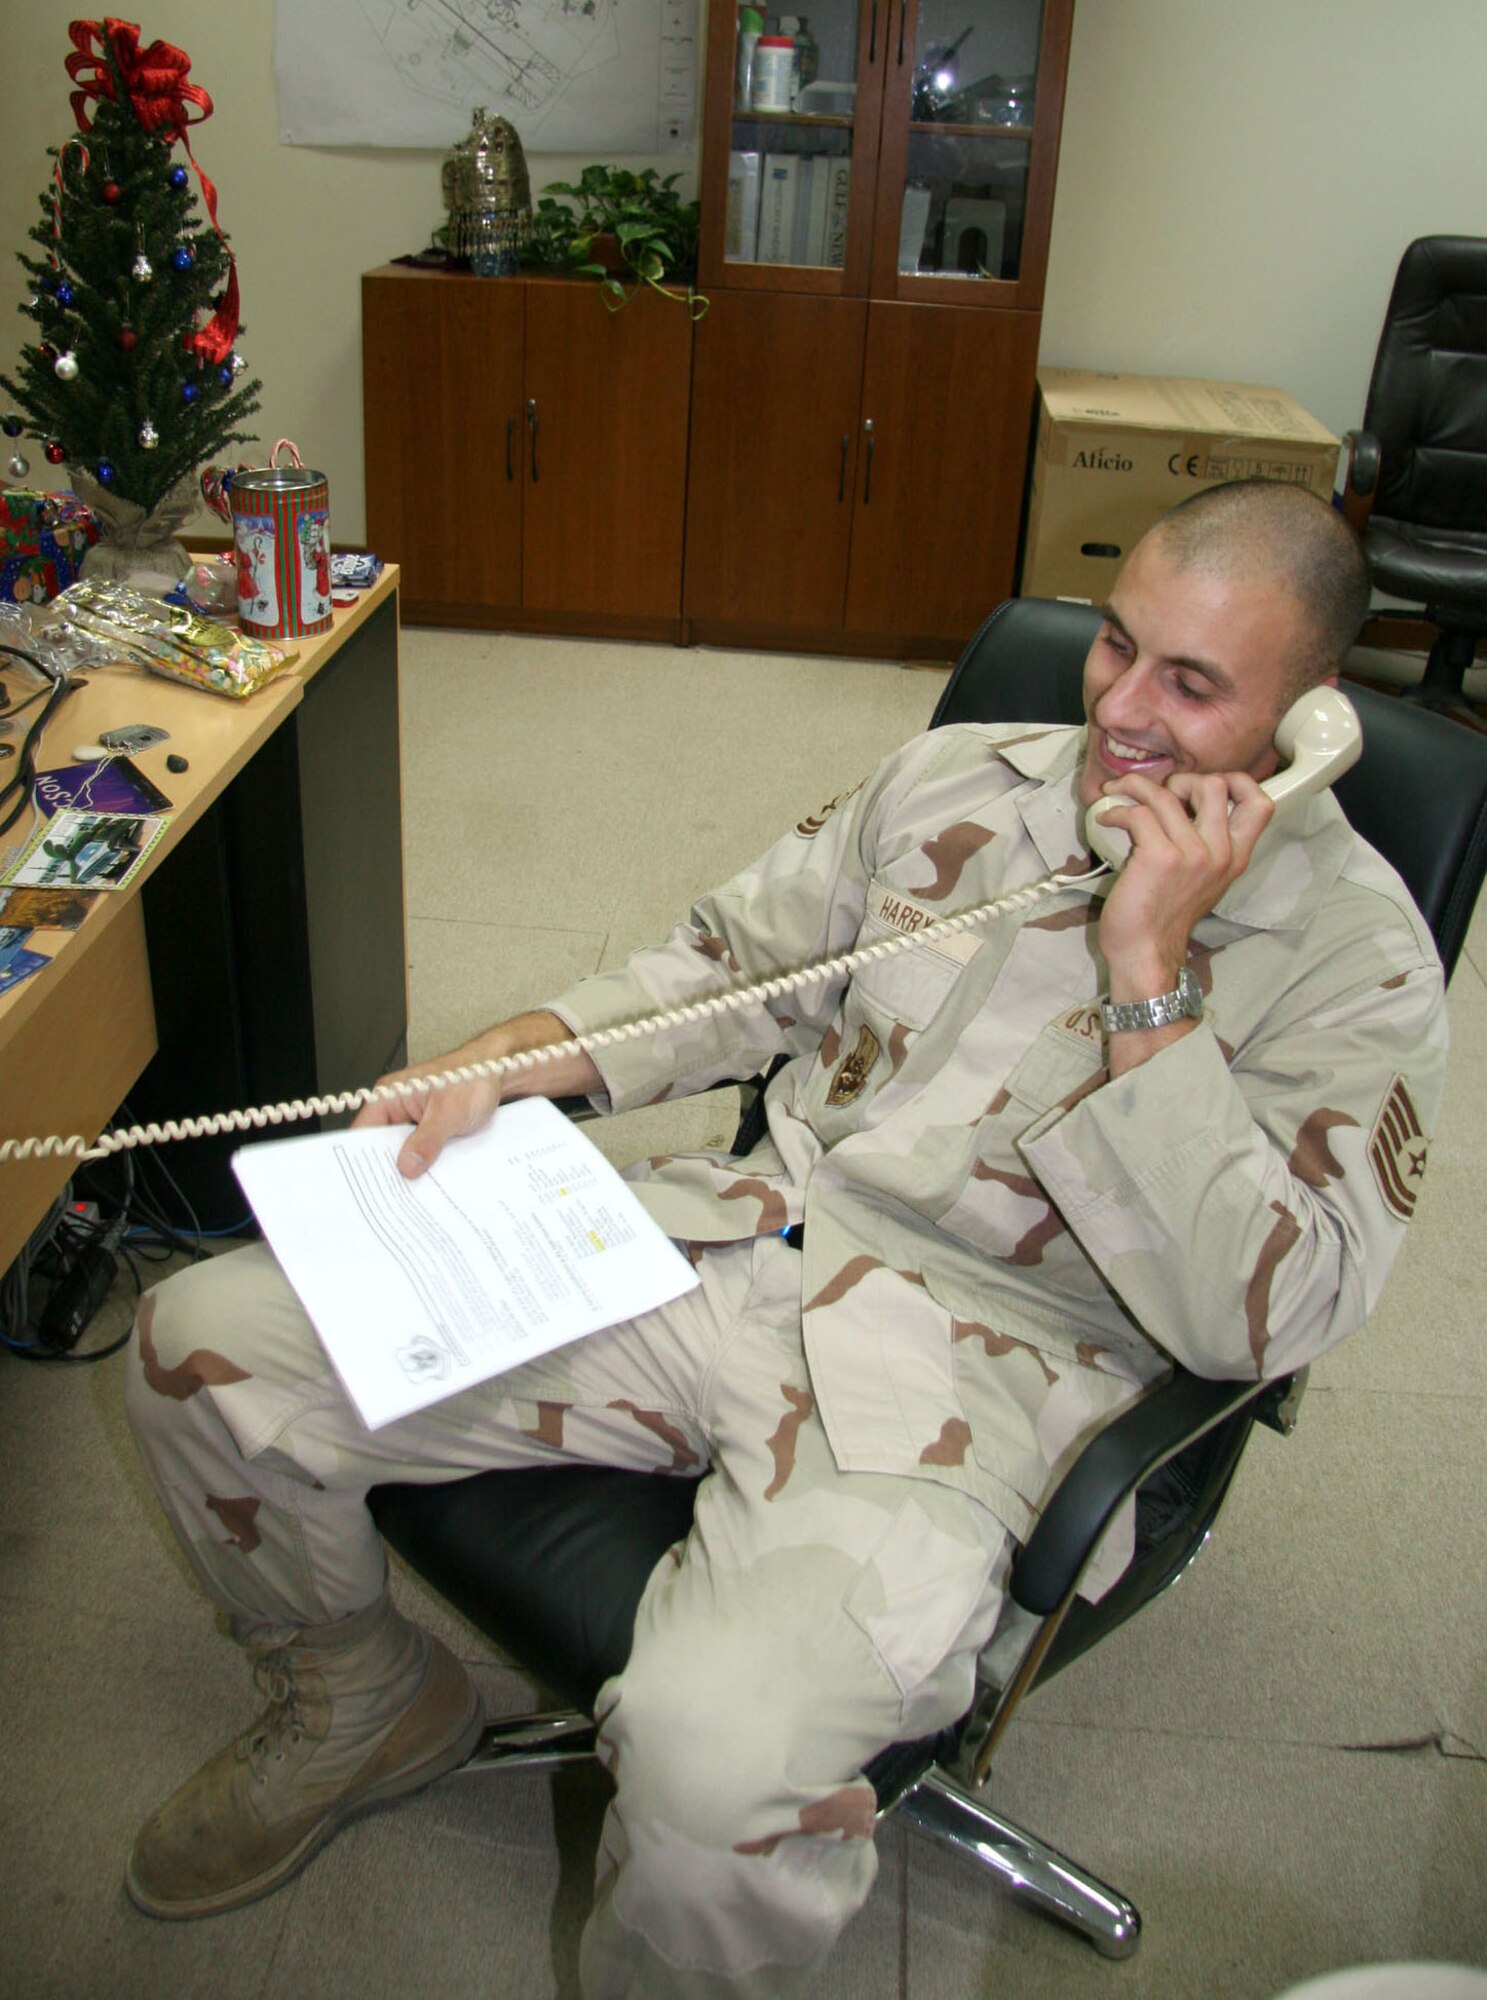 Tech. Sgt. Christopher Harry, deployed to Southwest Asia over the holidays, shares cheerful conversation on Christmas Eve during a conference call with his family. Sergeant Harry is an Air Force Reserve Command aerial port technician who has been deployed since September. (US Air Force photo/Master Sgt. Ruby Zarzyczny)